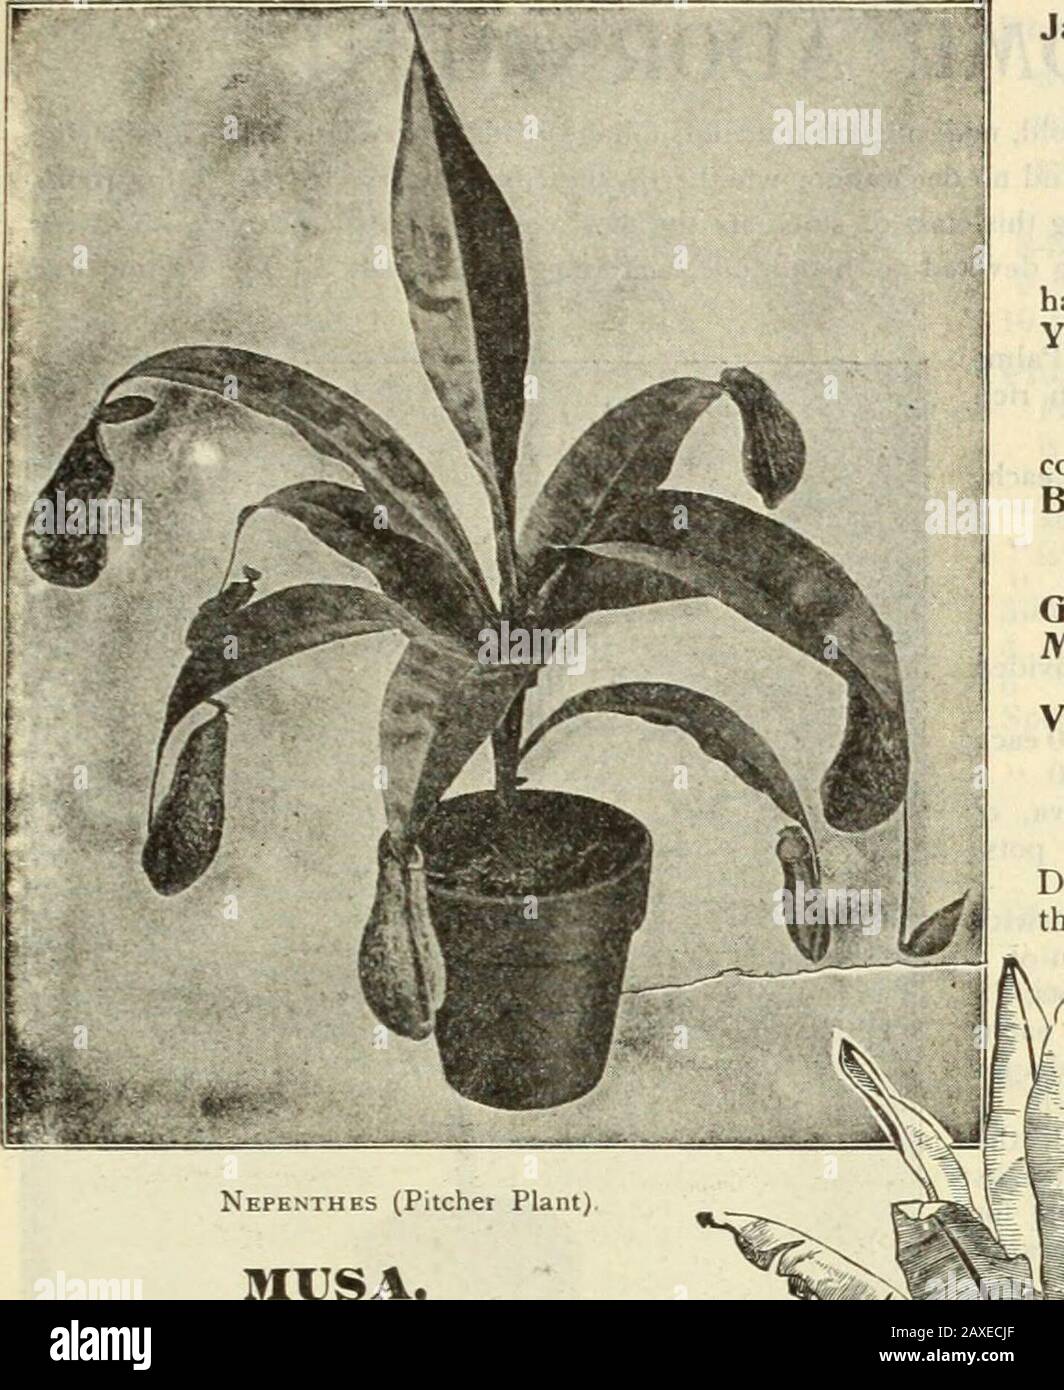 Dreer's garden book : seventy-fourth annual edition 1912 . lH!HRrADRE[RvPHIIADELPHIA ft-^GARDtM^°Oi;E[nHOUS^ PlAhTS; Tfl i^. MUSA. Ensete {Abyssinian Banana). Thegrandest of all Bananas; the leaves aremagnificent, long, broad and massive; ofbeautiful green, with a broad, crimsonmidrib; the plant grows luxuriantly from8 tol2 feet high. During the hot summer,when planted out, it grows rapidly andattains gigantic proportions, producing atopical effect on the lawn or flower gar-den. (See cut.) Good plants, 30 cts.each; strong plants in 5-inch pots, 50 cts.each; 7-inch pots, $1.00 to $1.50 each. M Stock Photo